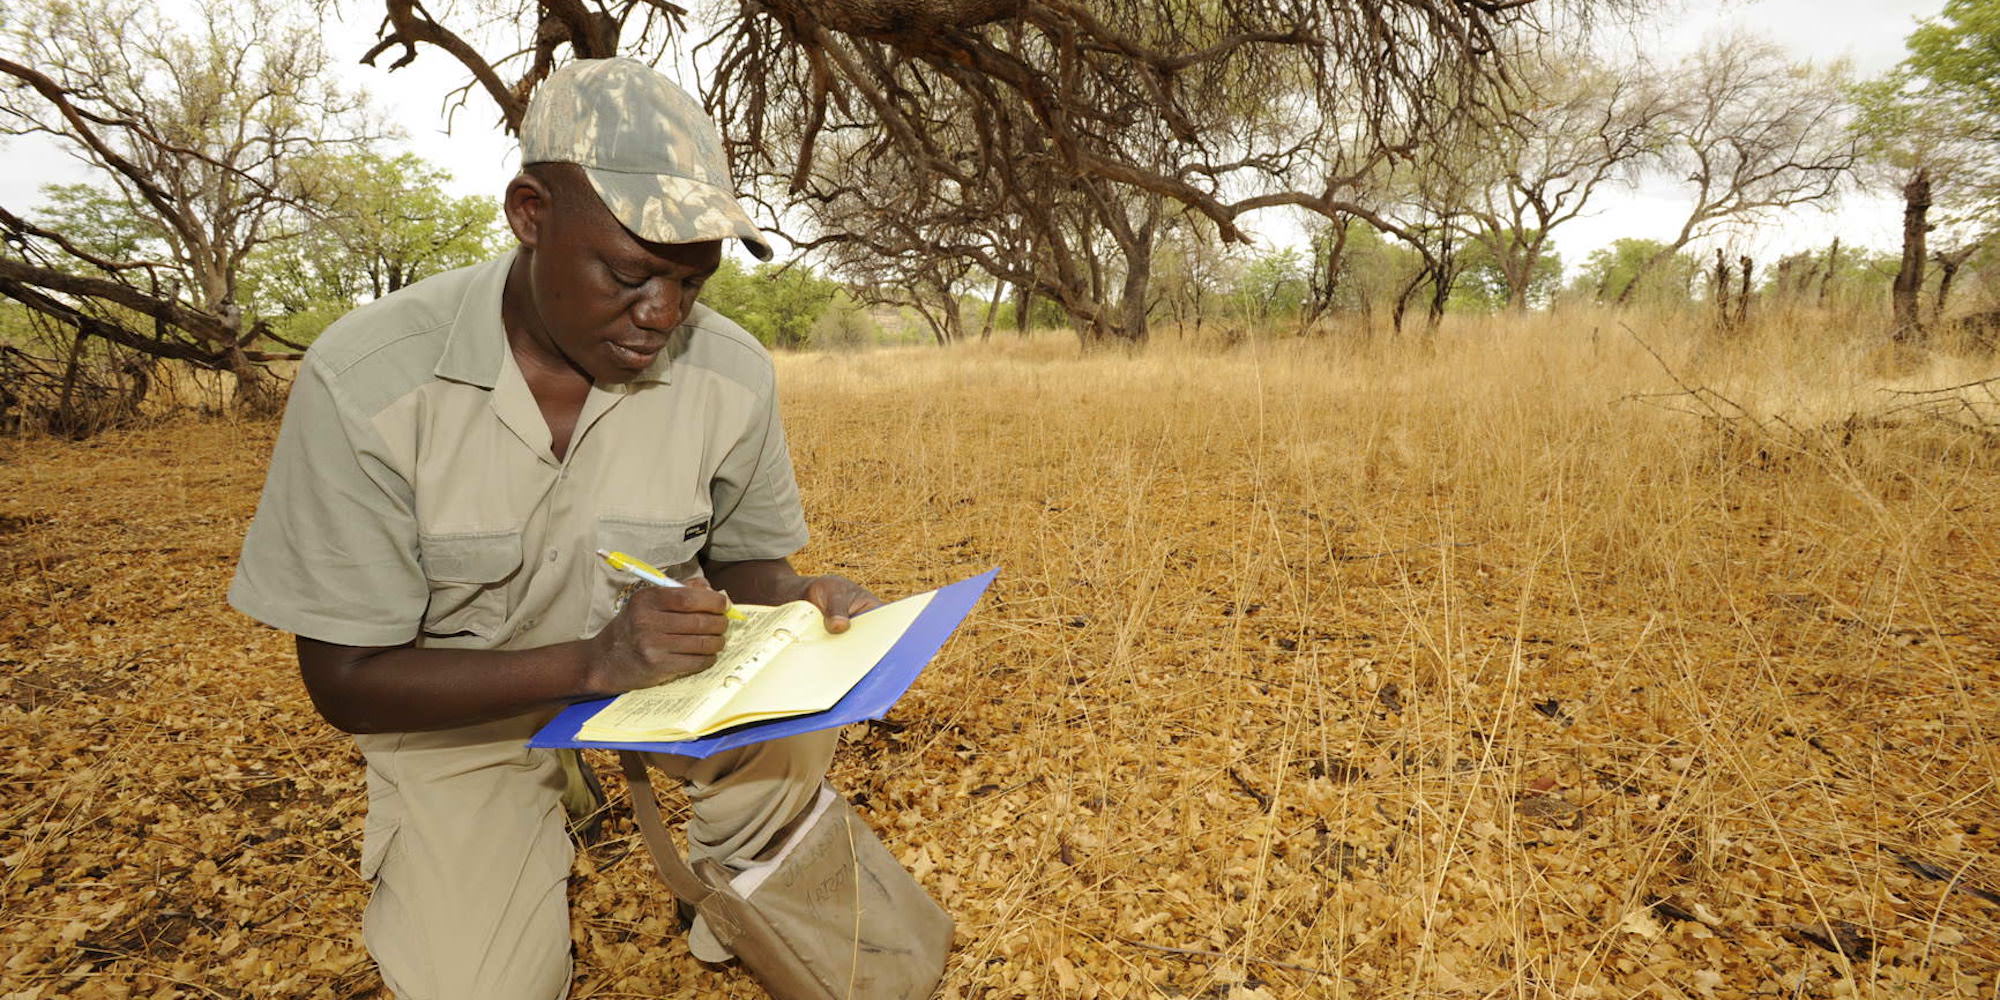 A game guard kneels in the shade of a tree while he fills out his event book. The ground is parched and dry..